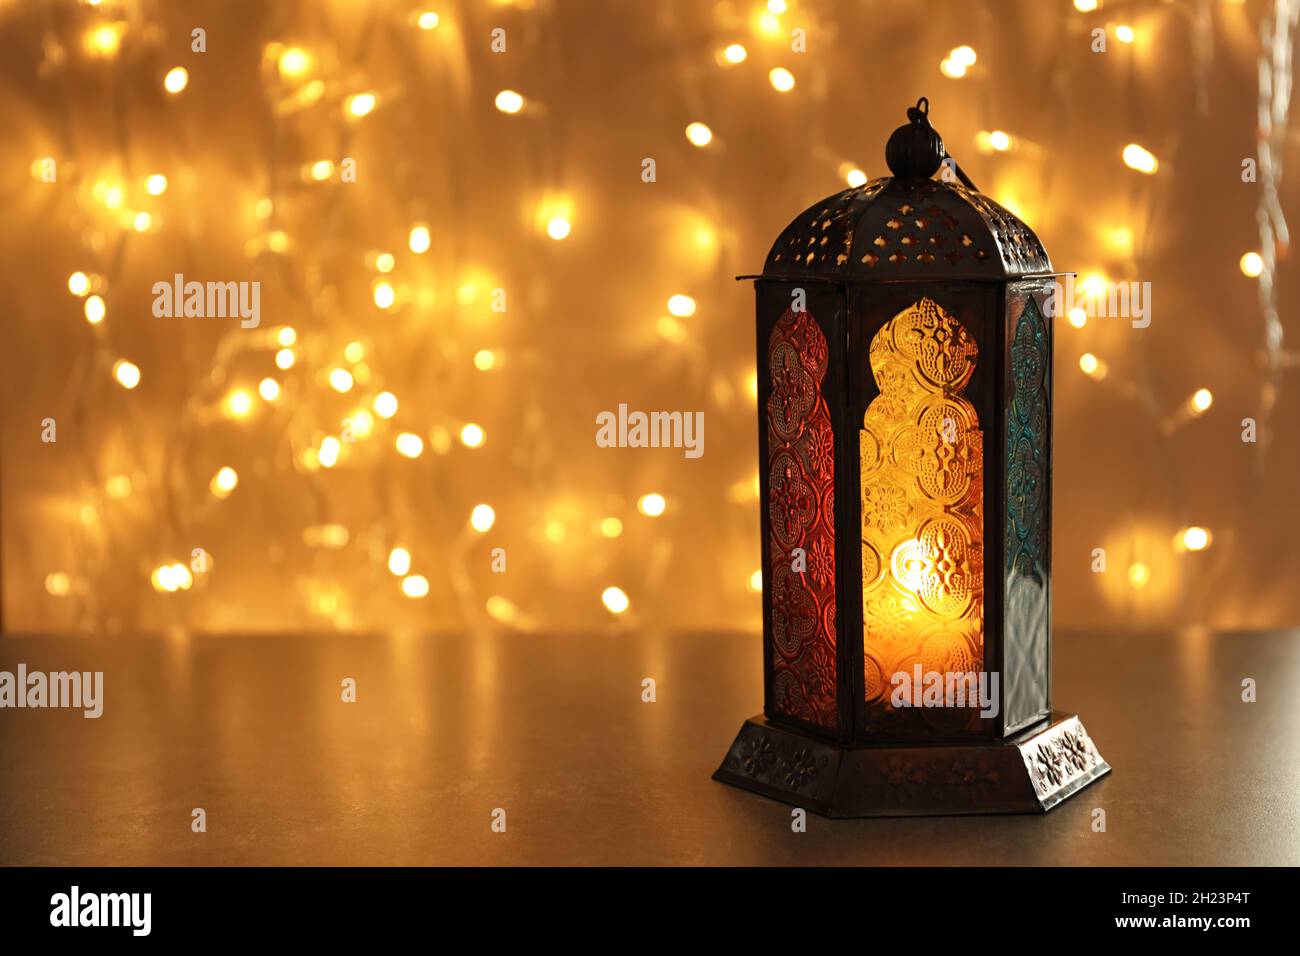 Muslim lamp with candle on table against blurred fairy lights. Fanous as  Ramadan symbol Stock Photo - Alamy